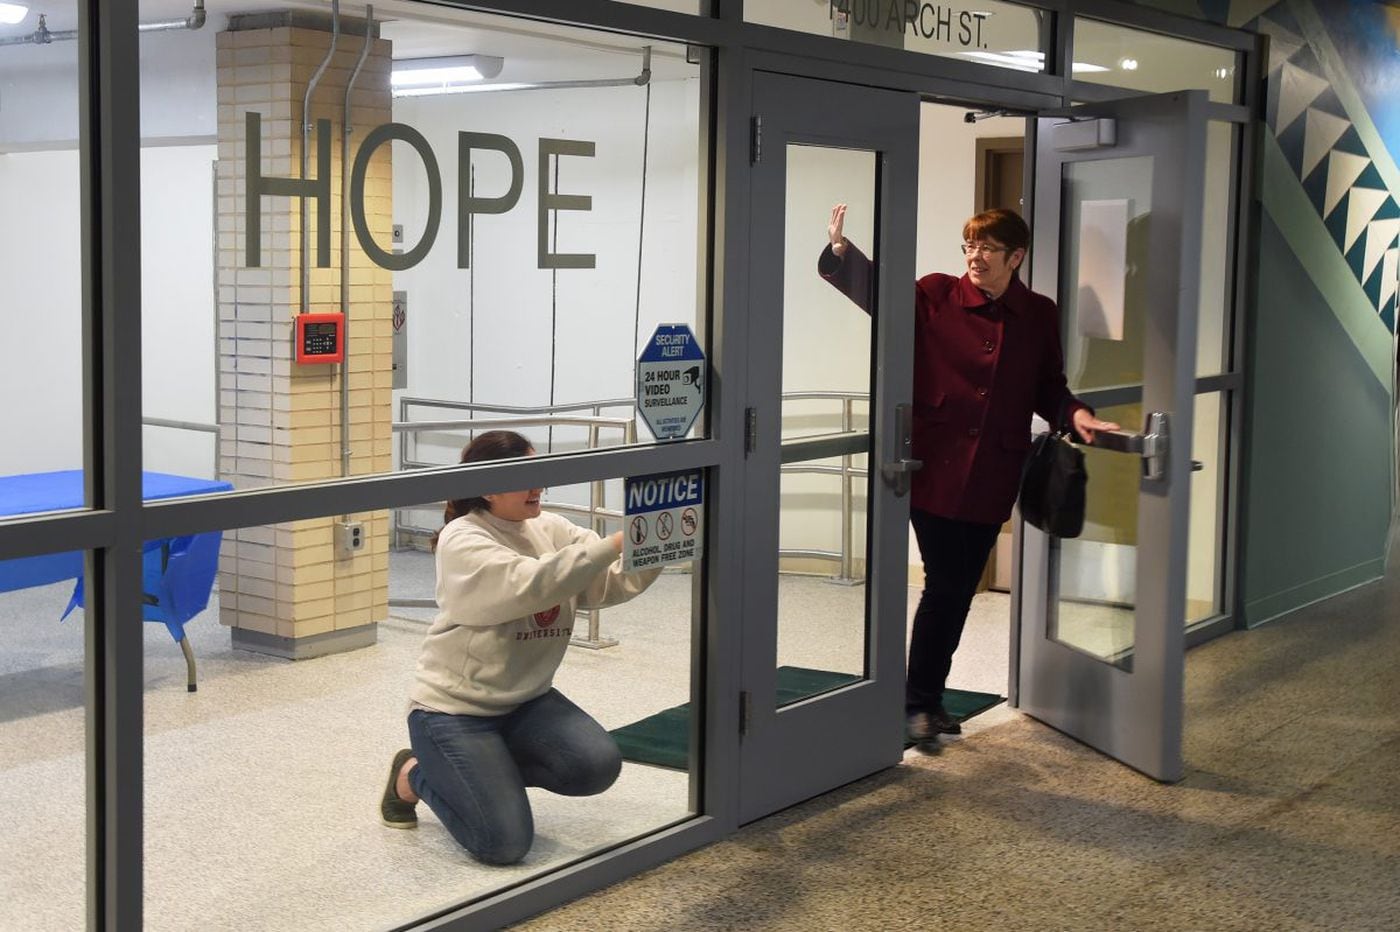 Get a first look at Suburban Station's new homeless services center